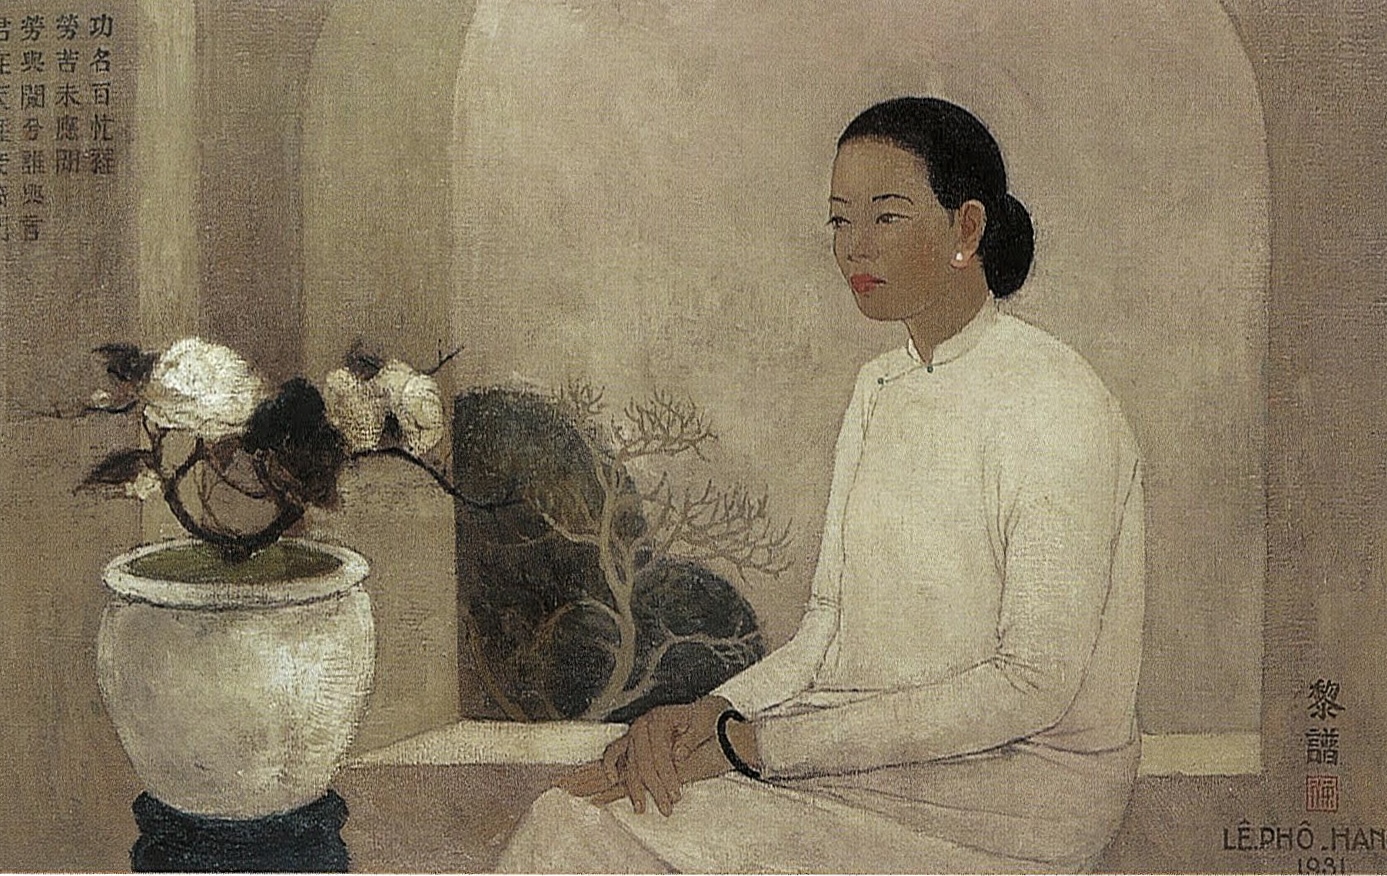 Le Pho (Vietnamese, 1907-2001), The Mandarin’s Wife, signed and dated ‘LE-PHO 1931’ (lower right), oil on canvas, 81x130 cm. (31 ⁵⁷/₆₄ x 51 ³/₁₆ in.), painted in 1931